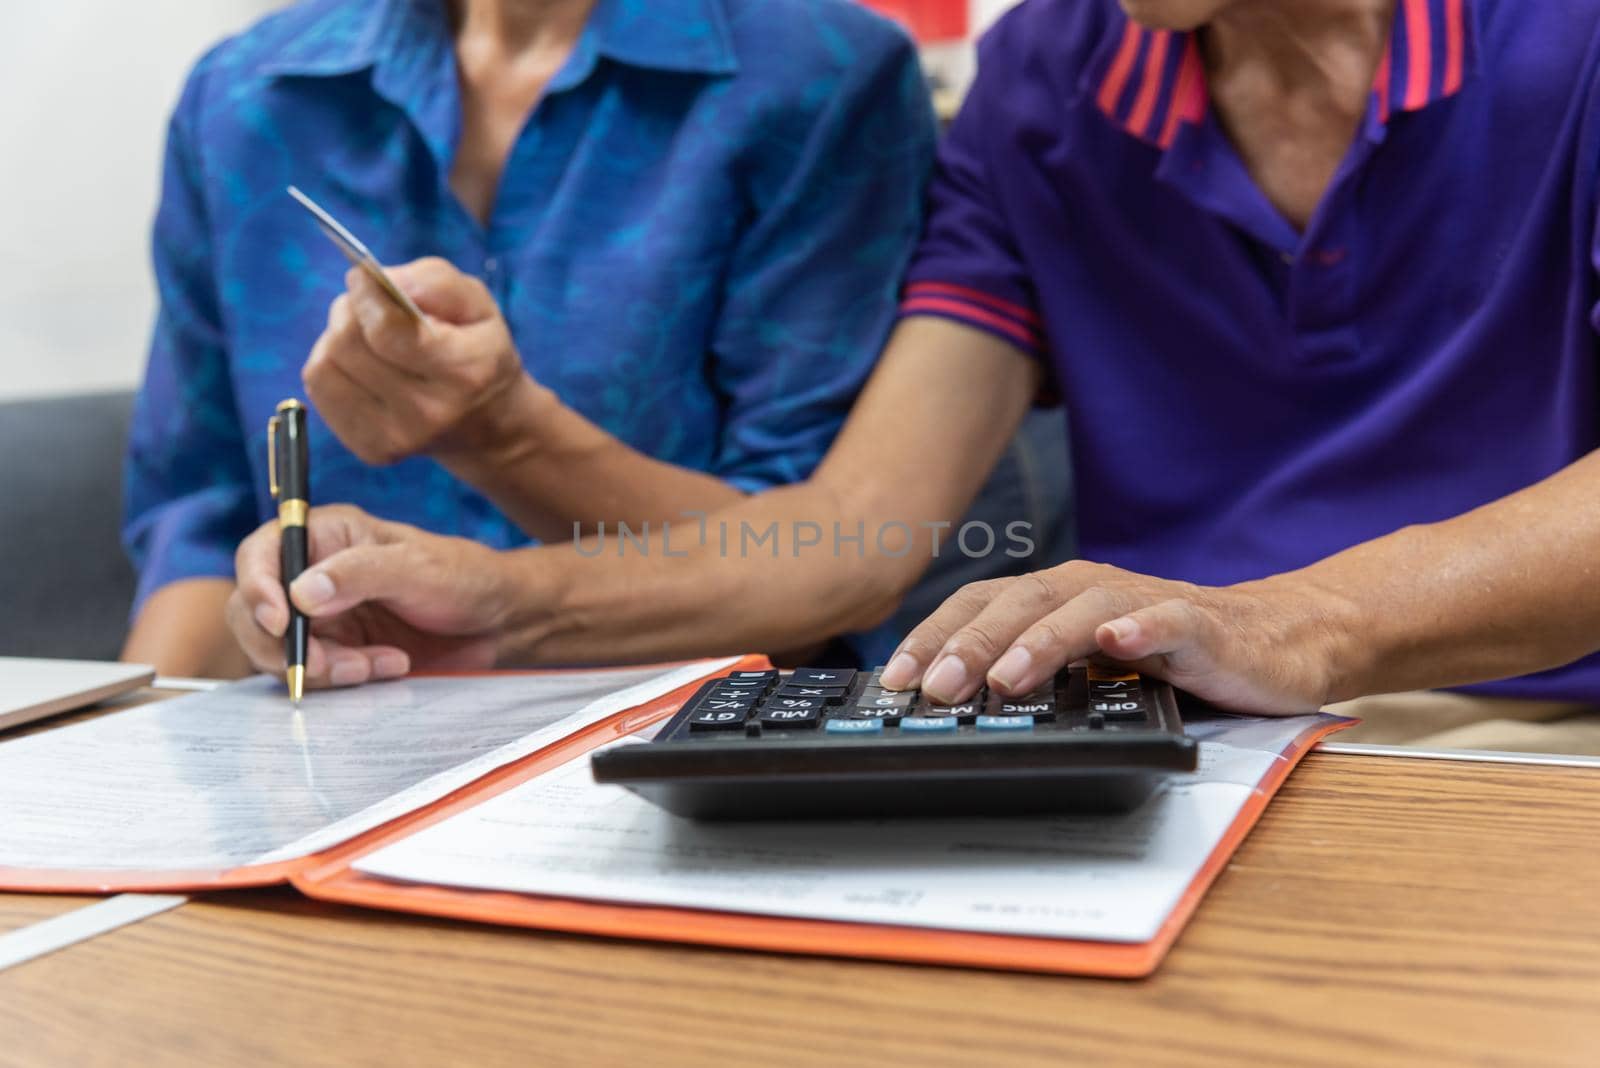 Asian elderly holding pen contract payment credit card insurance health care paperwork or document report shopping finance concept.